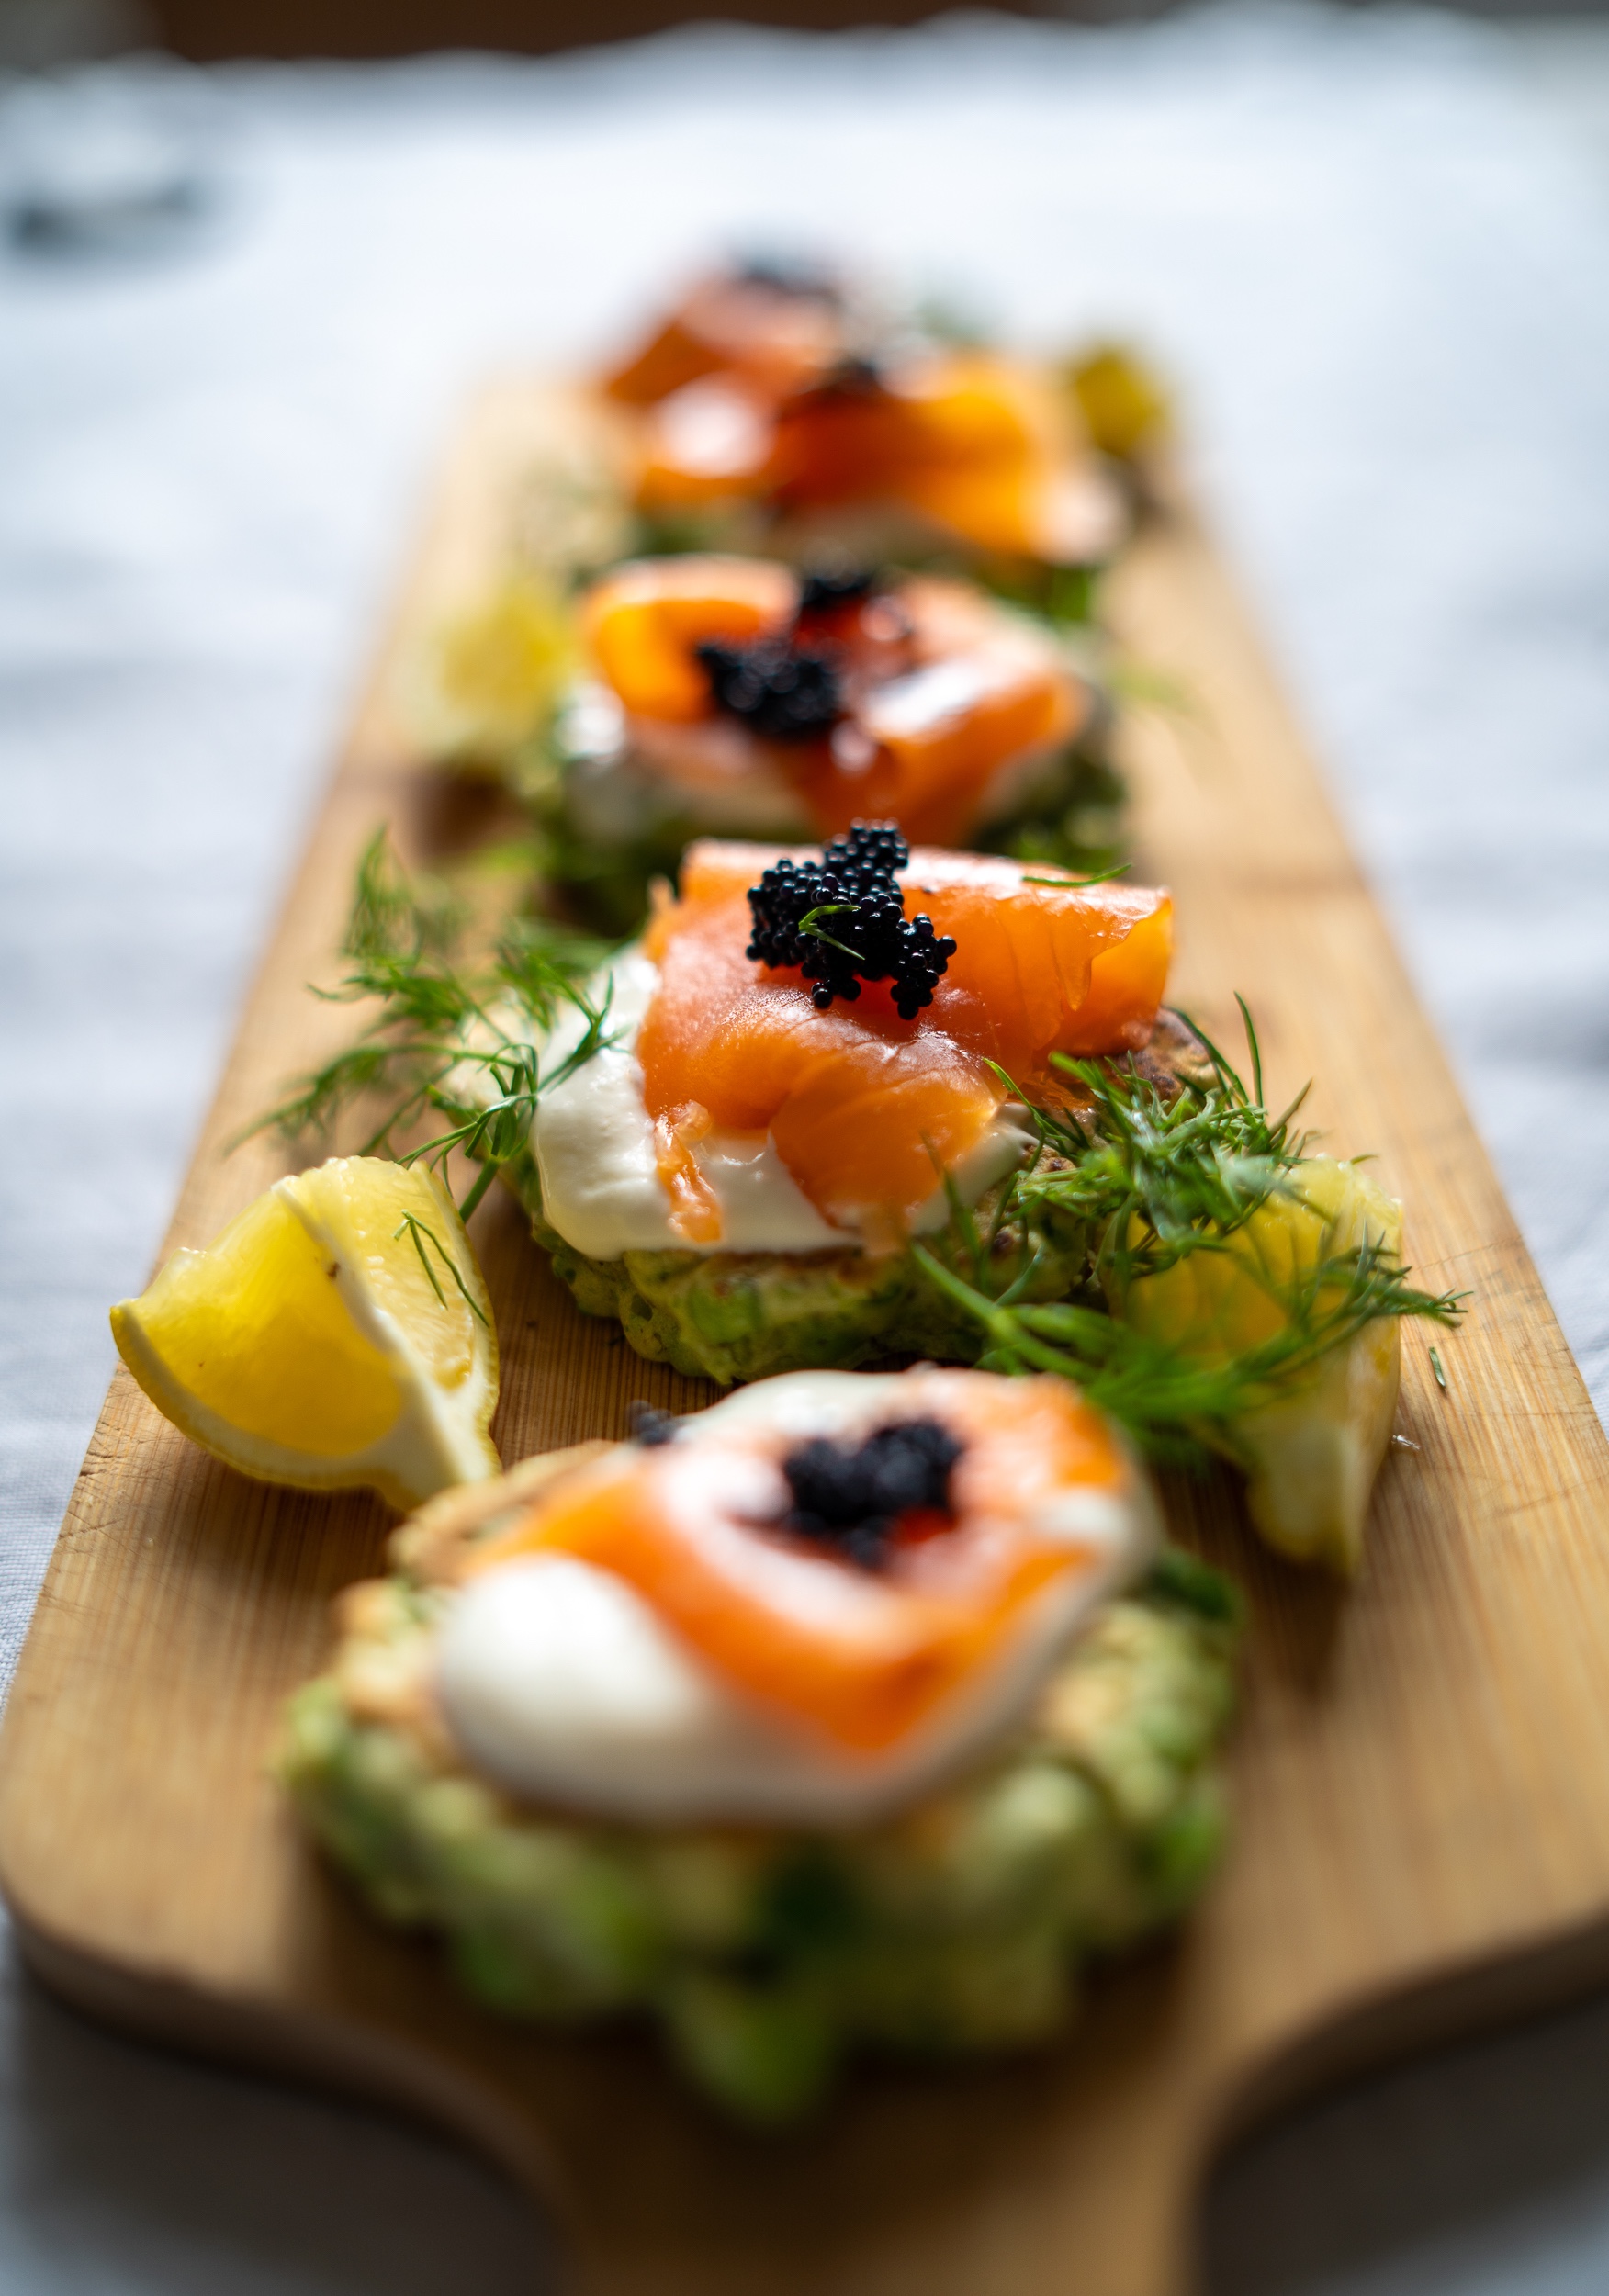 Pea Fritters With Smoked Salmon & Caviar